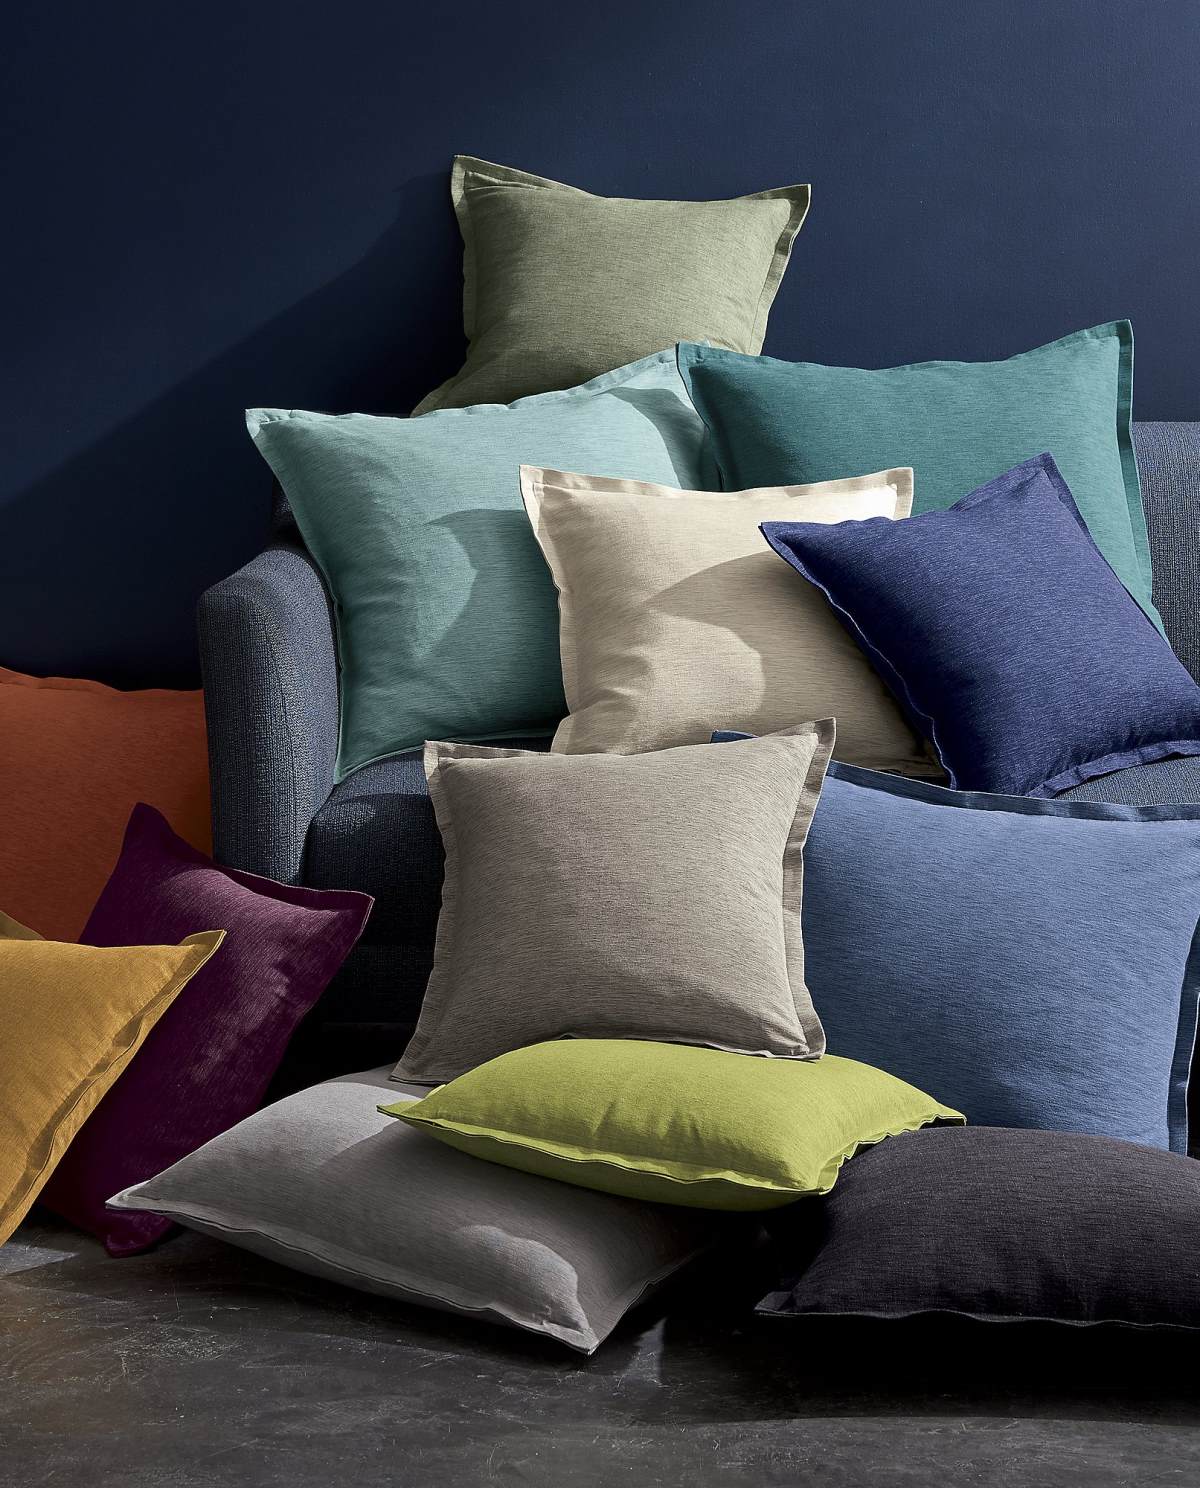 Assortment of pillows from Crate & Barrel